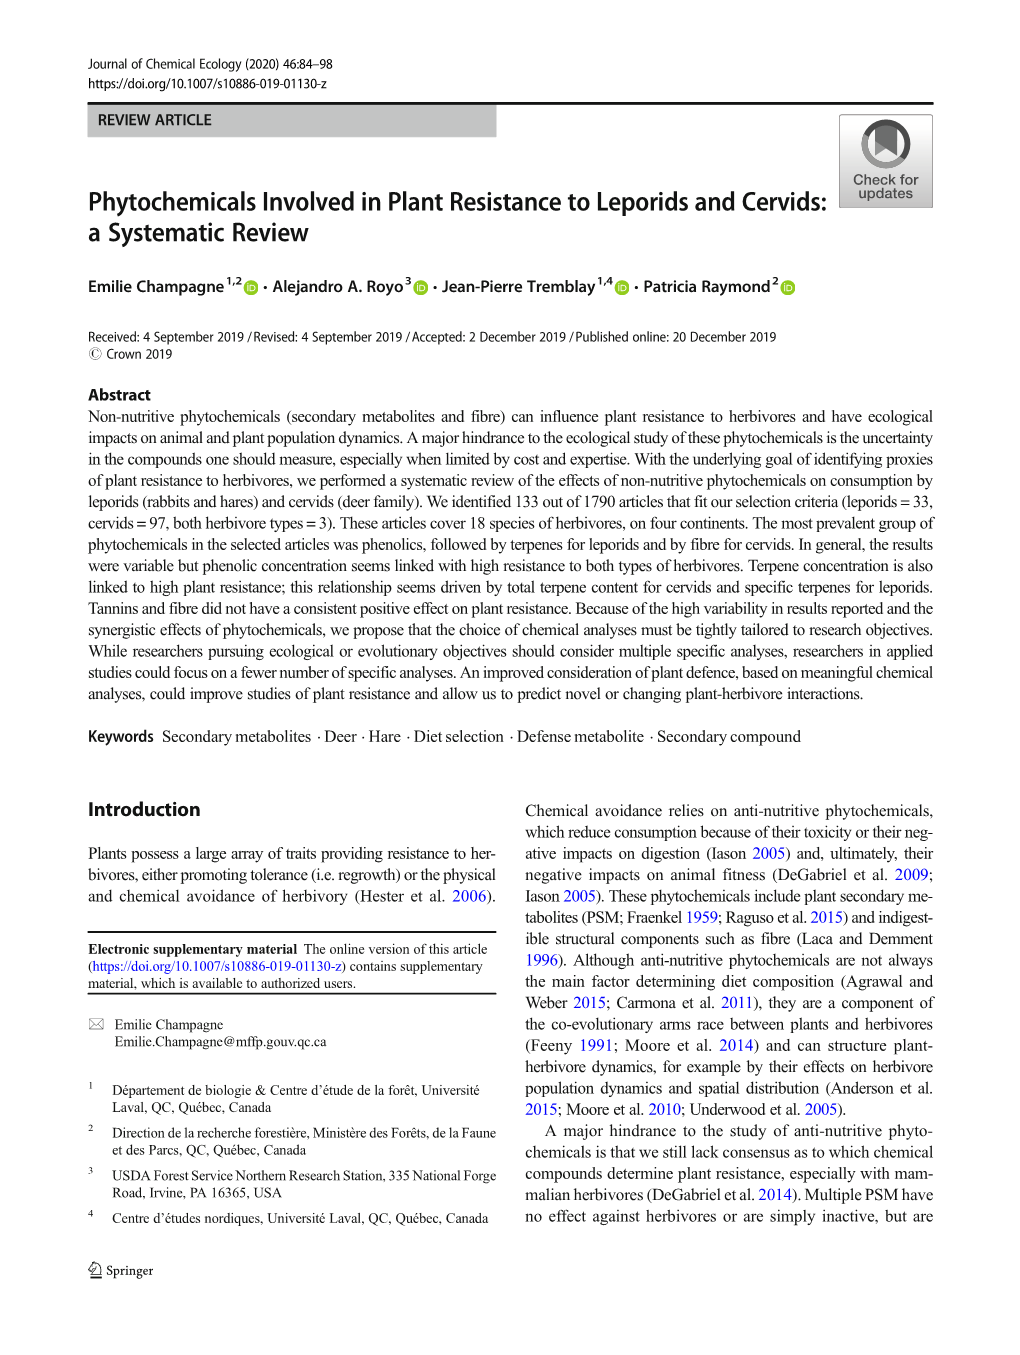 Phytochemicals Involved in Plant Resistance to Leporids and Cervids: a Systematic Review